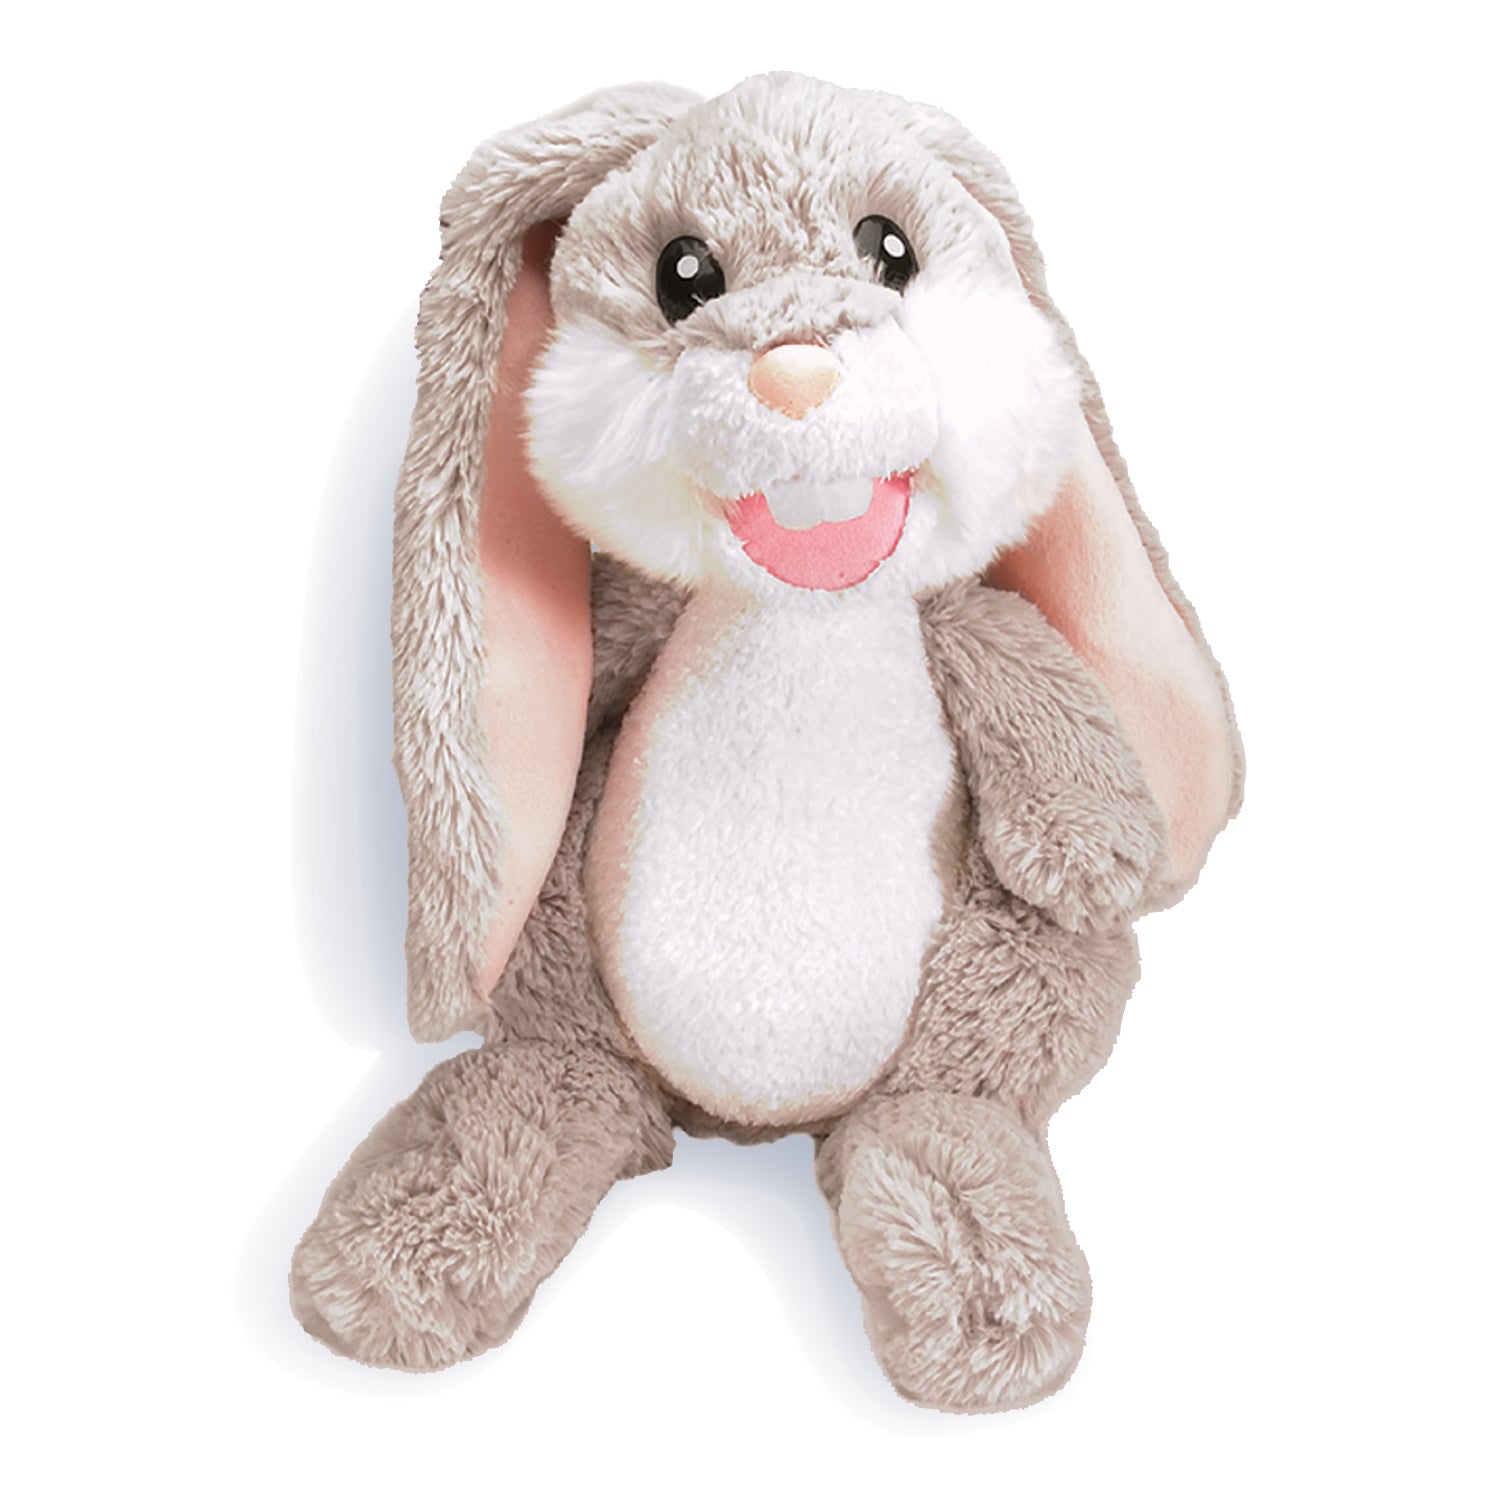 Tibbar Rabbit Puppet by SimplyFun perfect for imaginative play for ages 4 and up